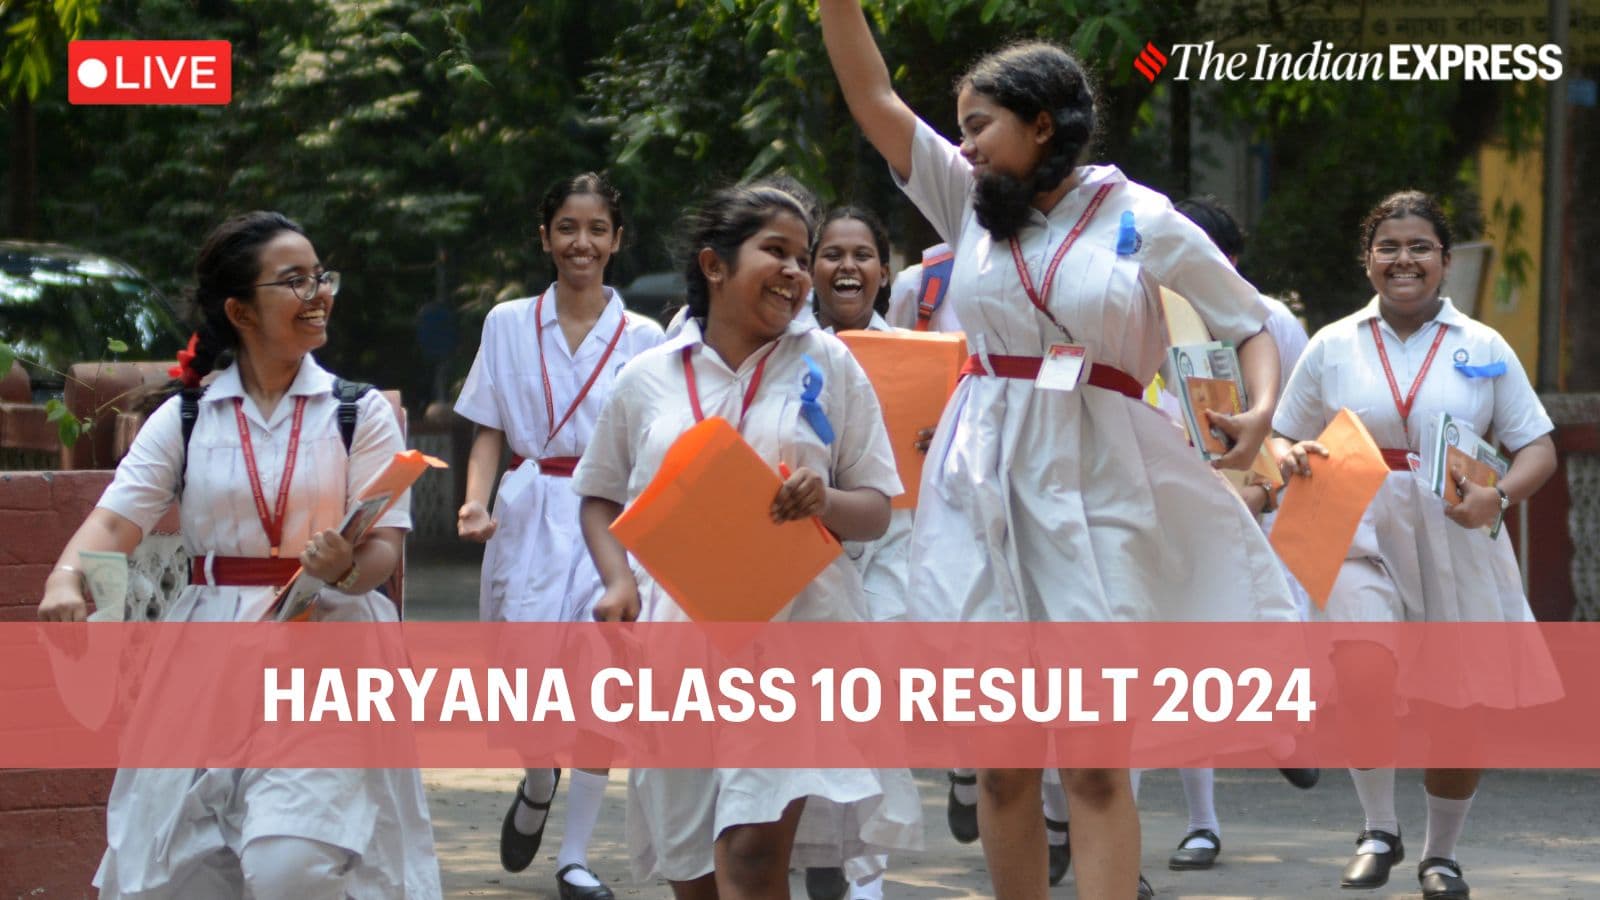 Haryana Board 10th Result 2024 Live Updates: Students who appeared for the exam can check their results at the official website of the board— bseh.org.in.